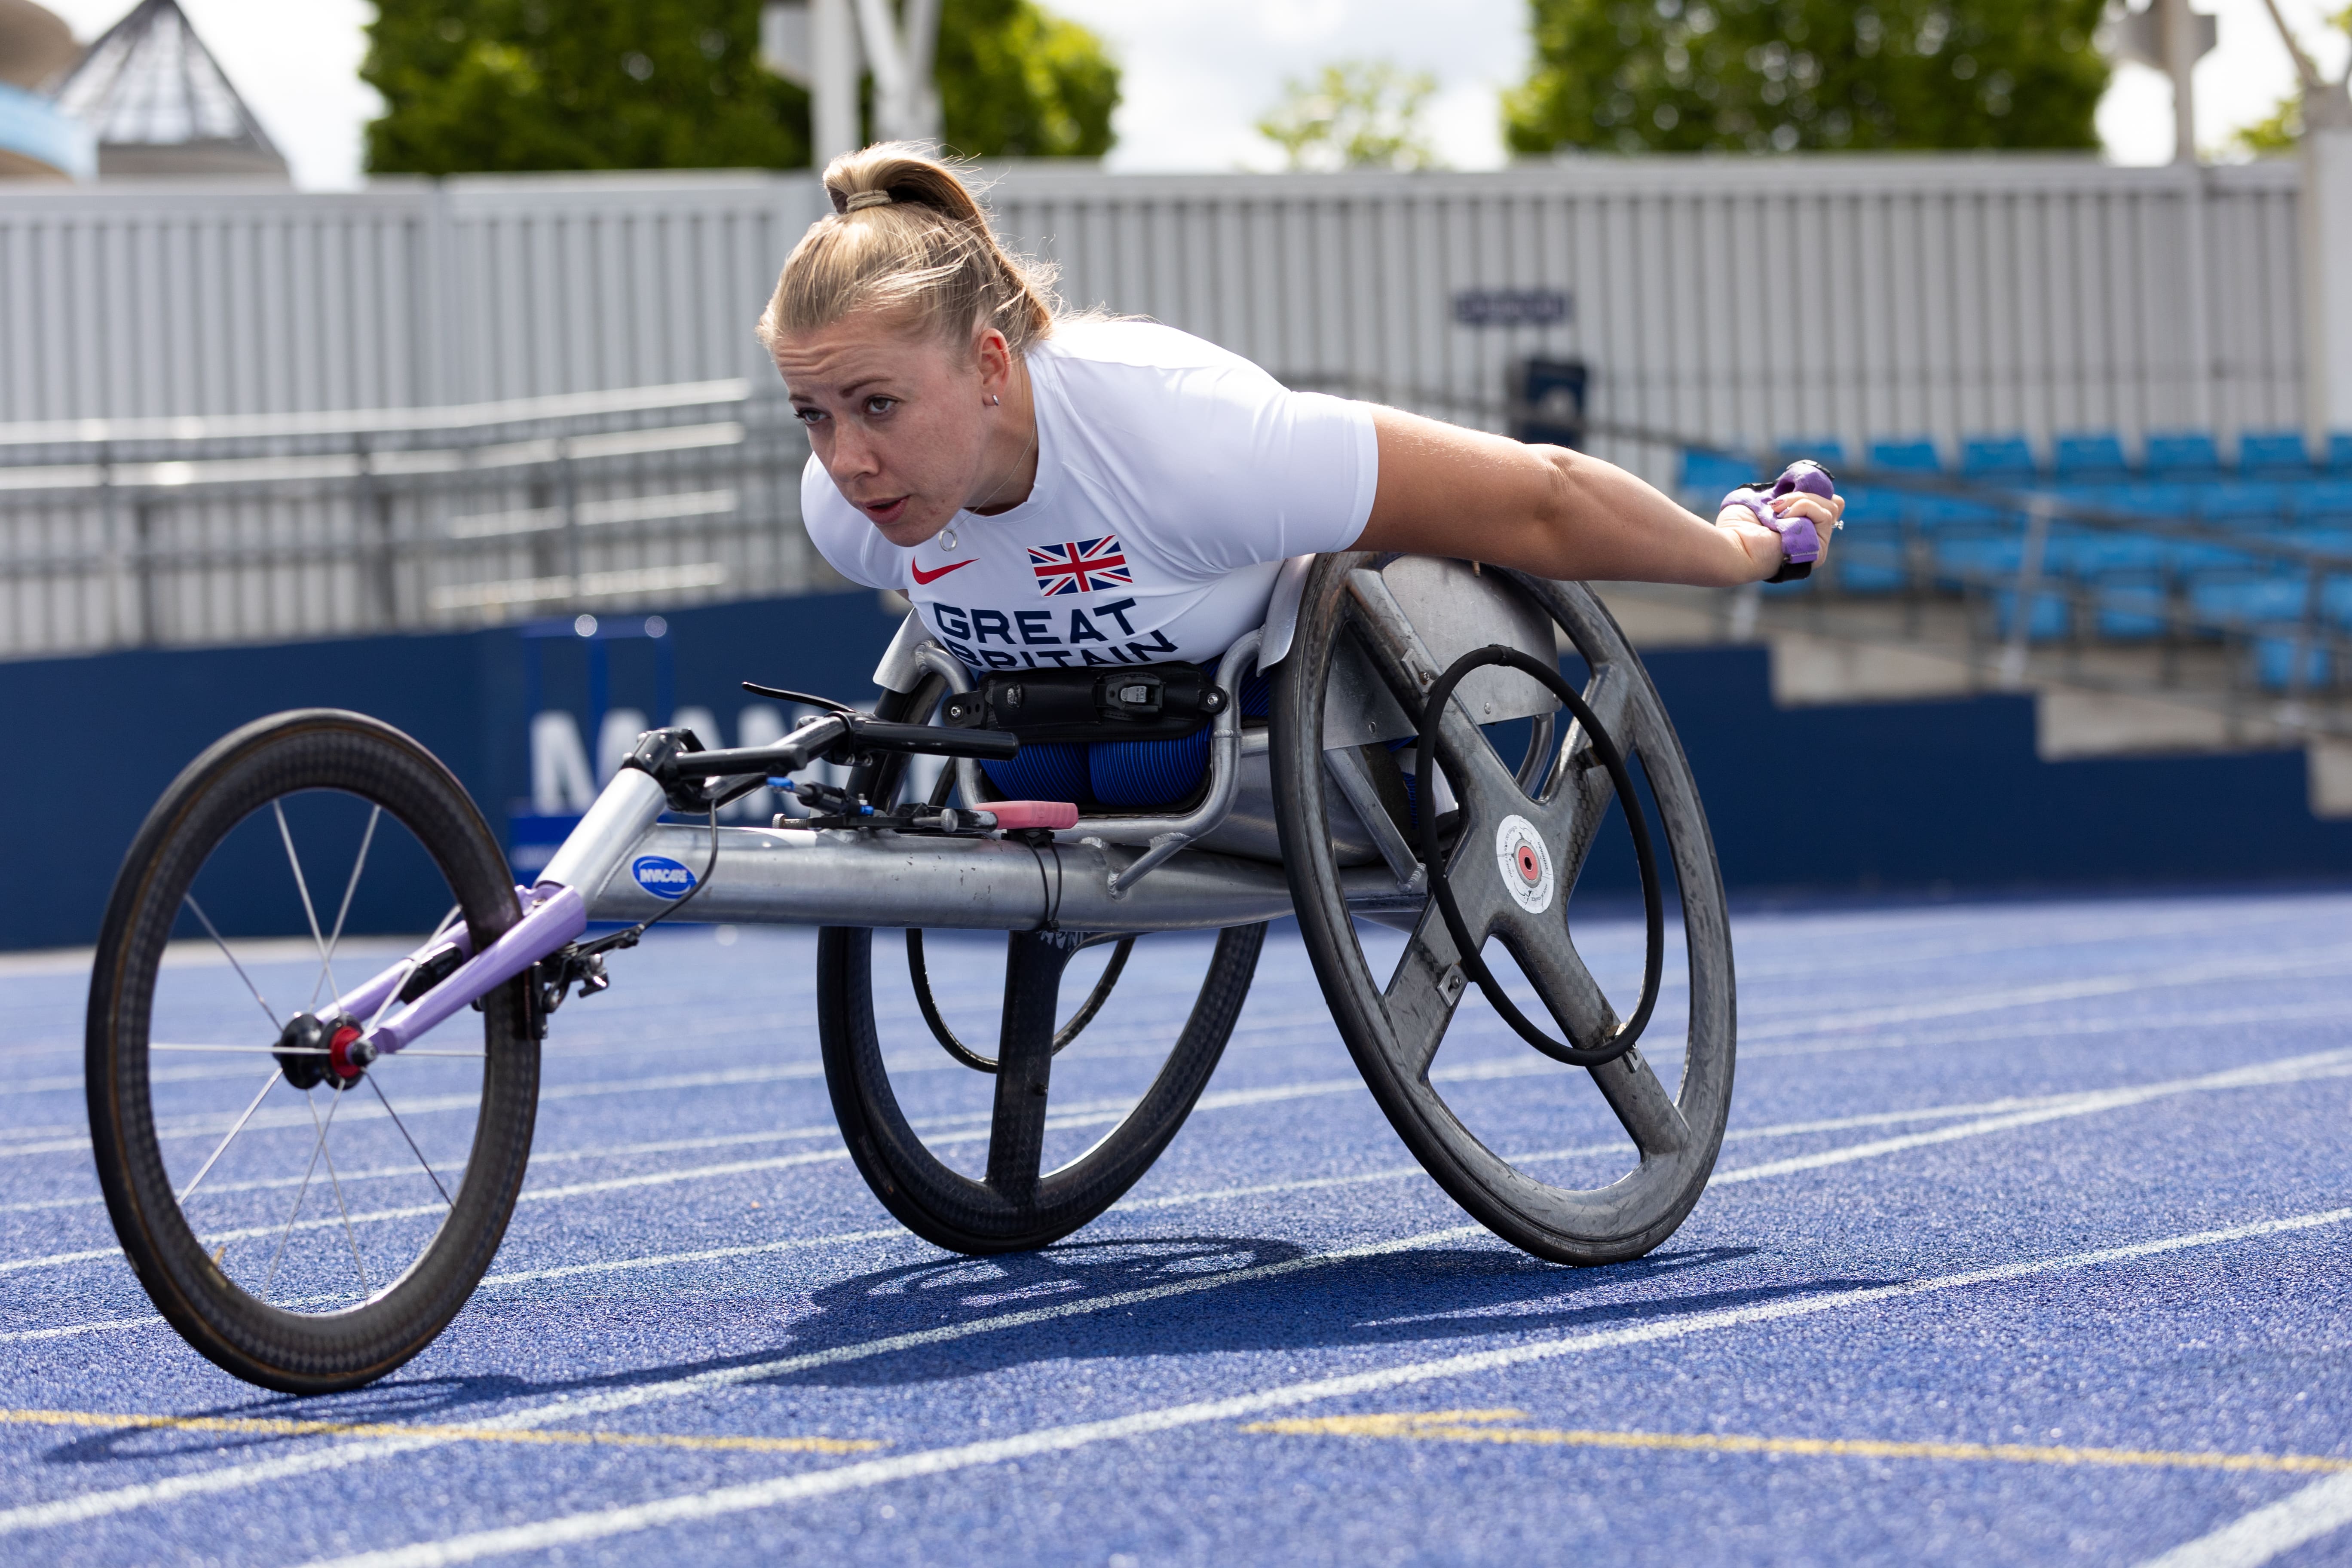 Hannah Cockroft is a seven-time Paralympic champion